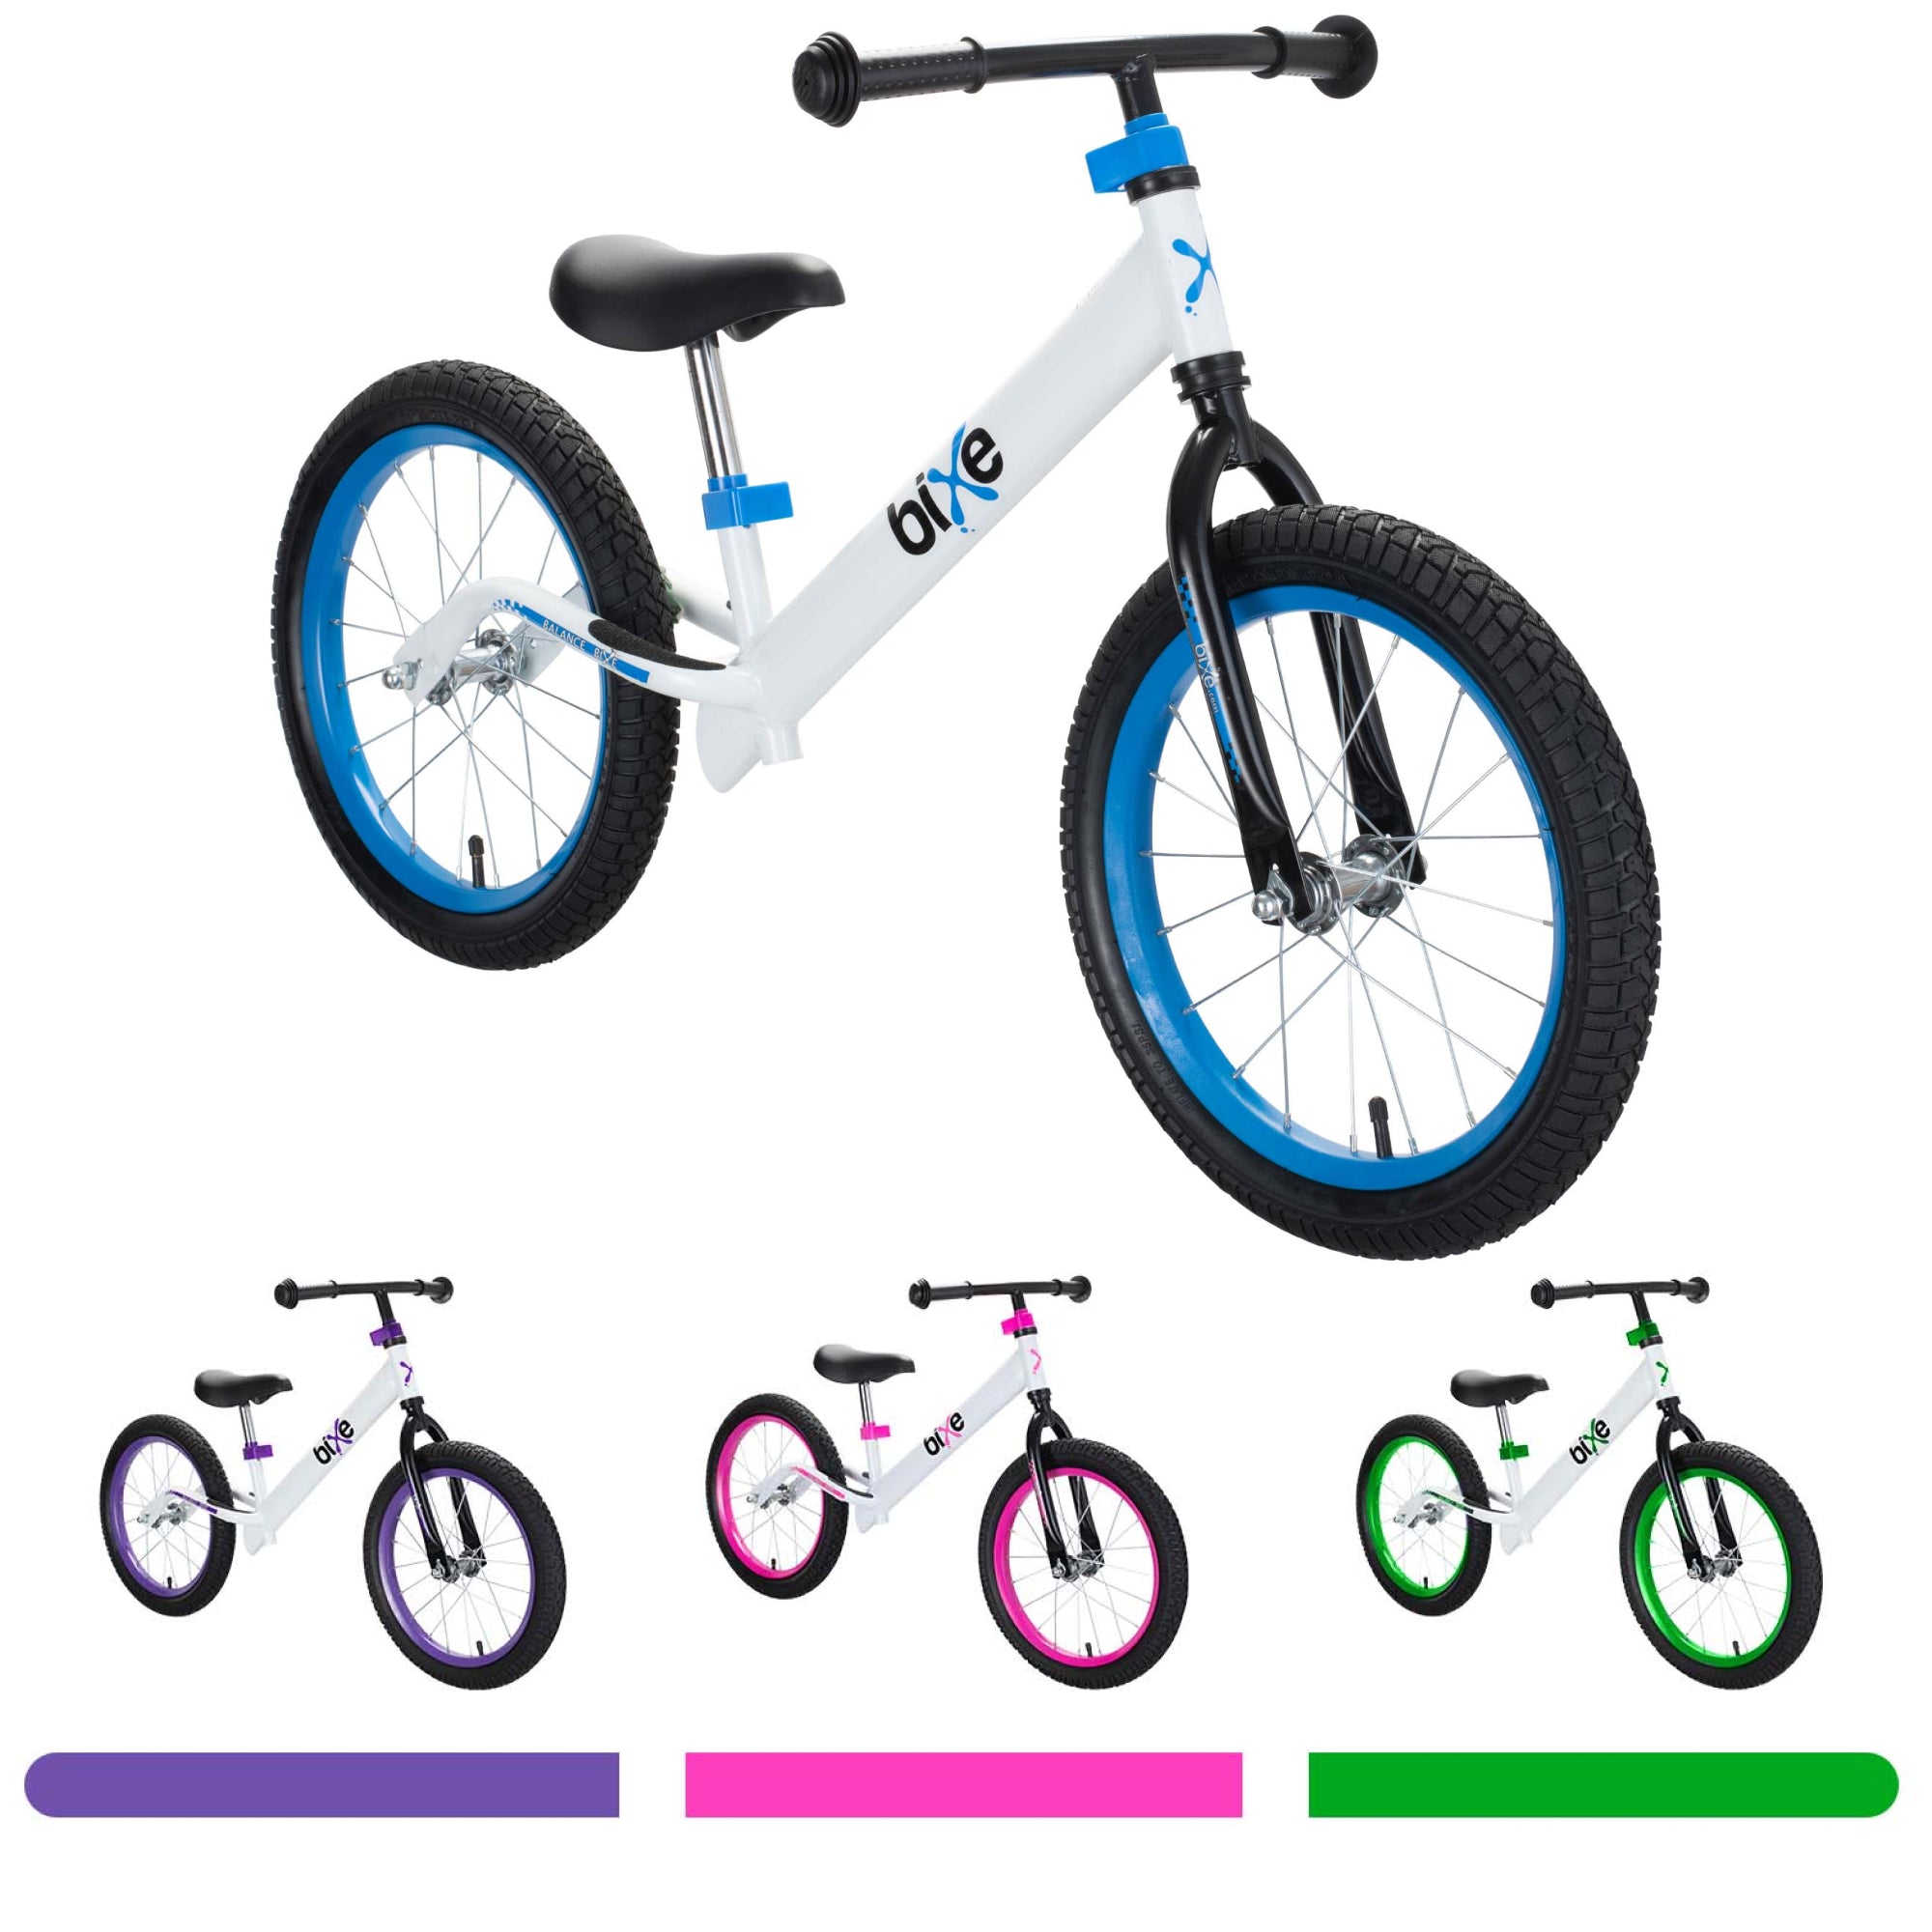 16 Pro Balance Bike For 5 9 Year Olds